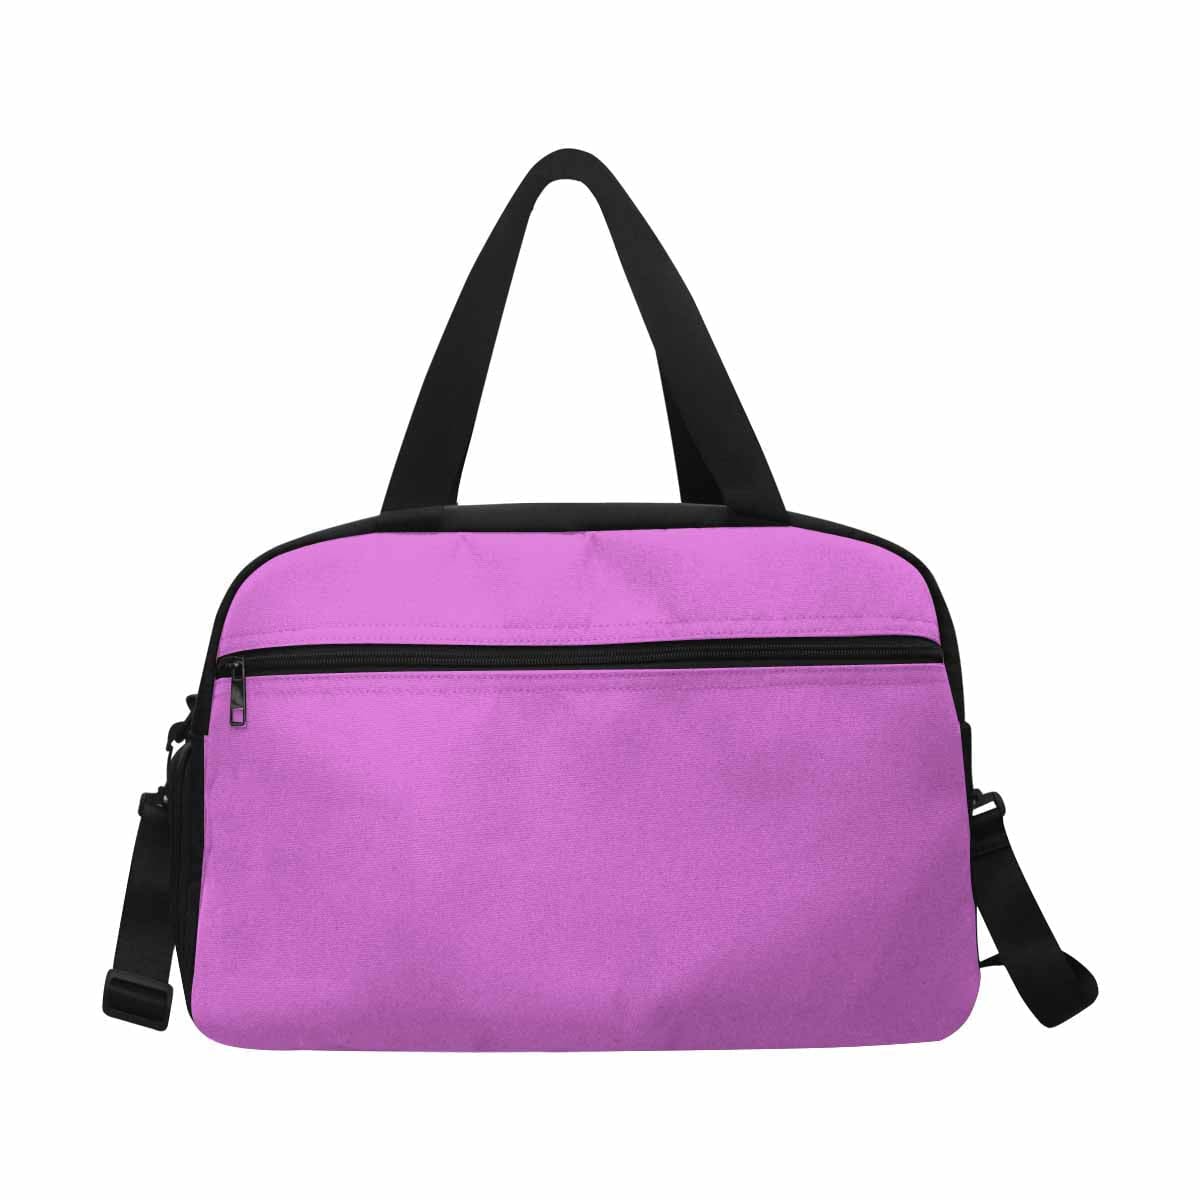 Orchid Purple Tote And Crossbody Travel Bag - Bags | Travel Bags | Crossbody